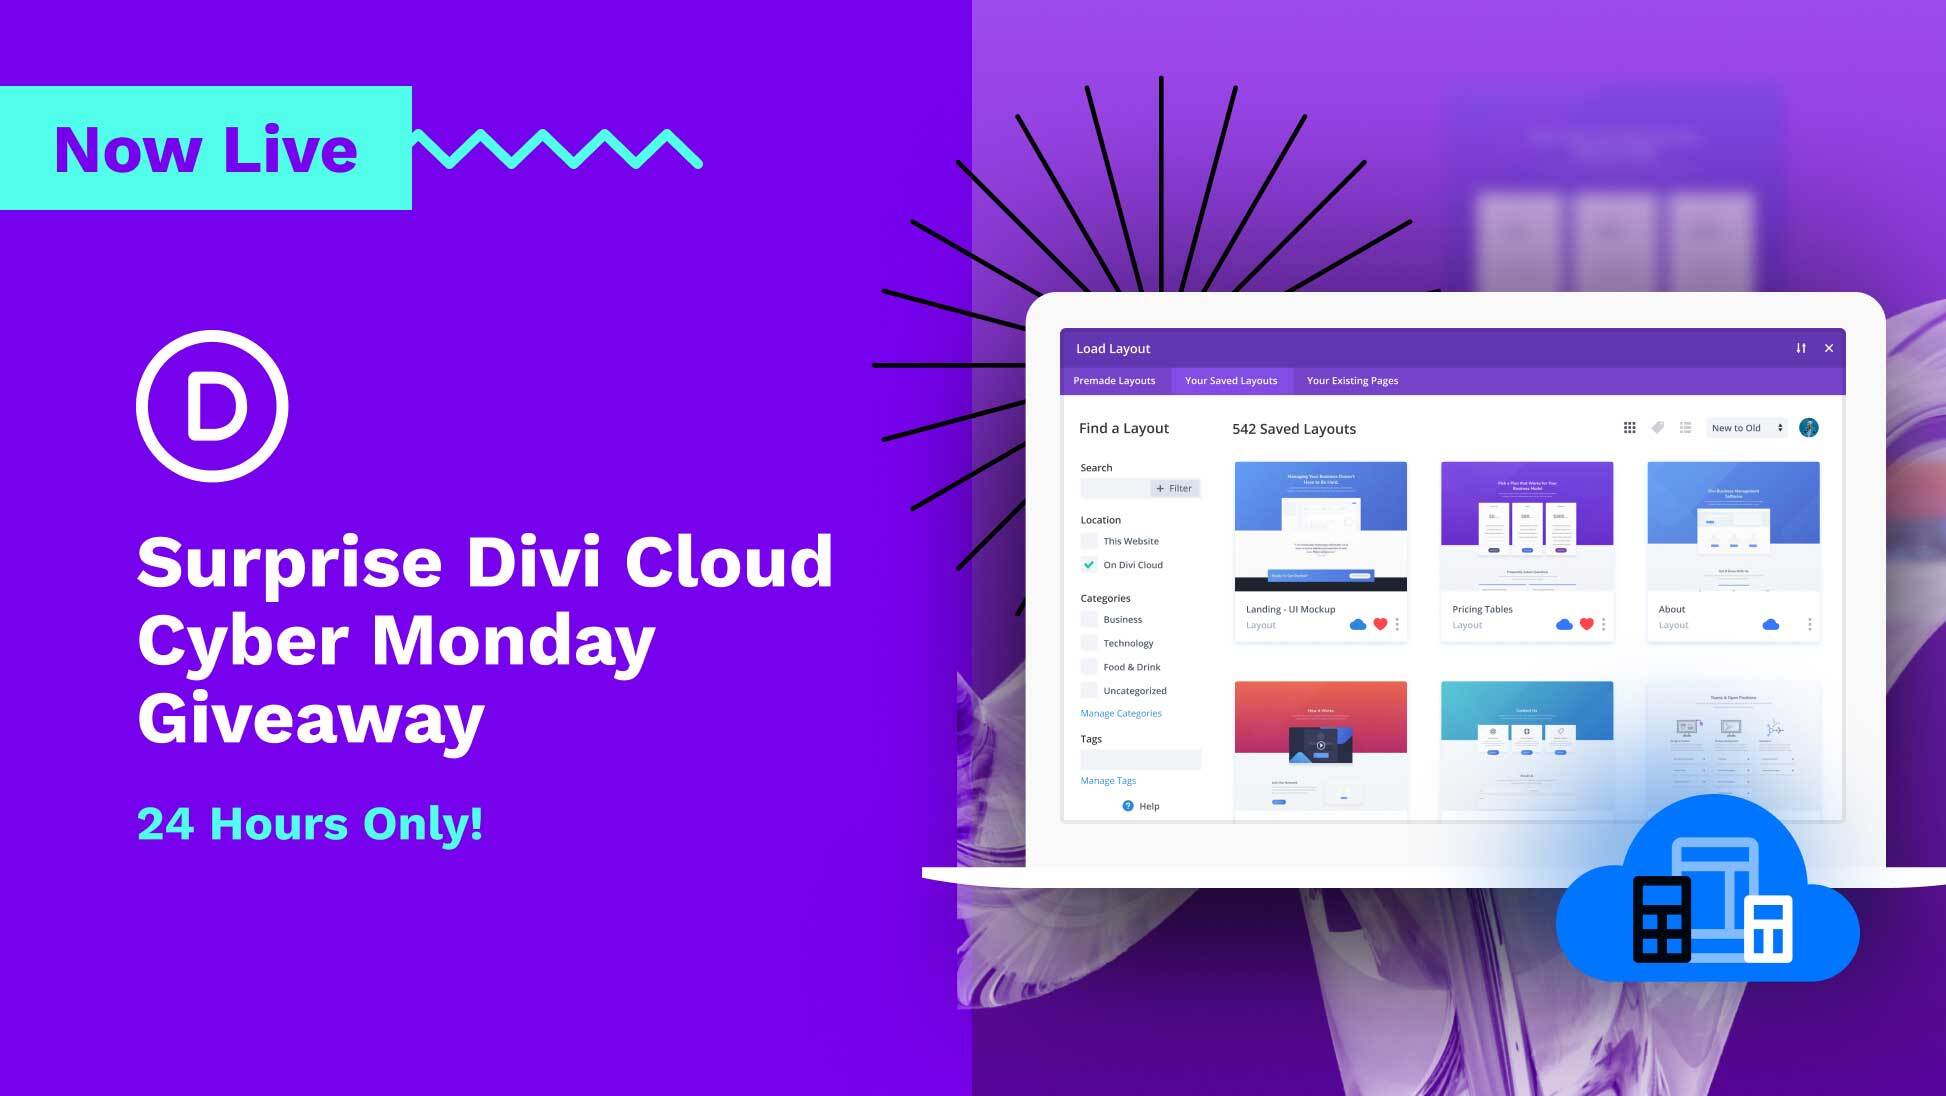 Let's Talk About Divi 5.0 And The Future Of Divi